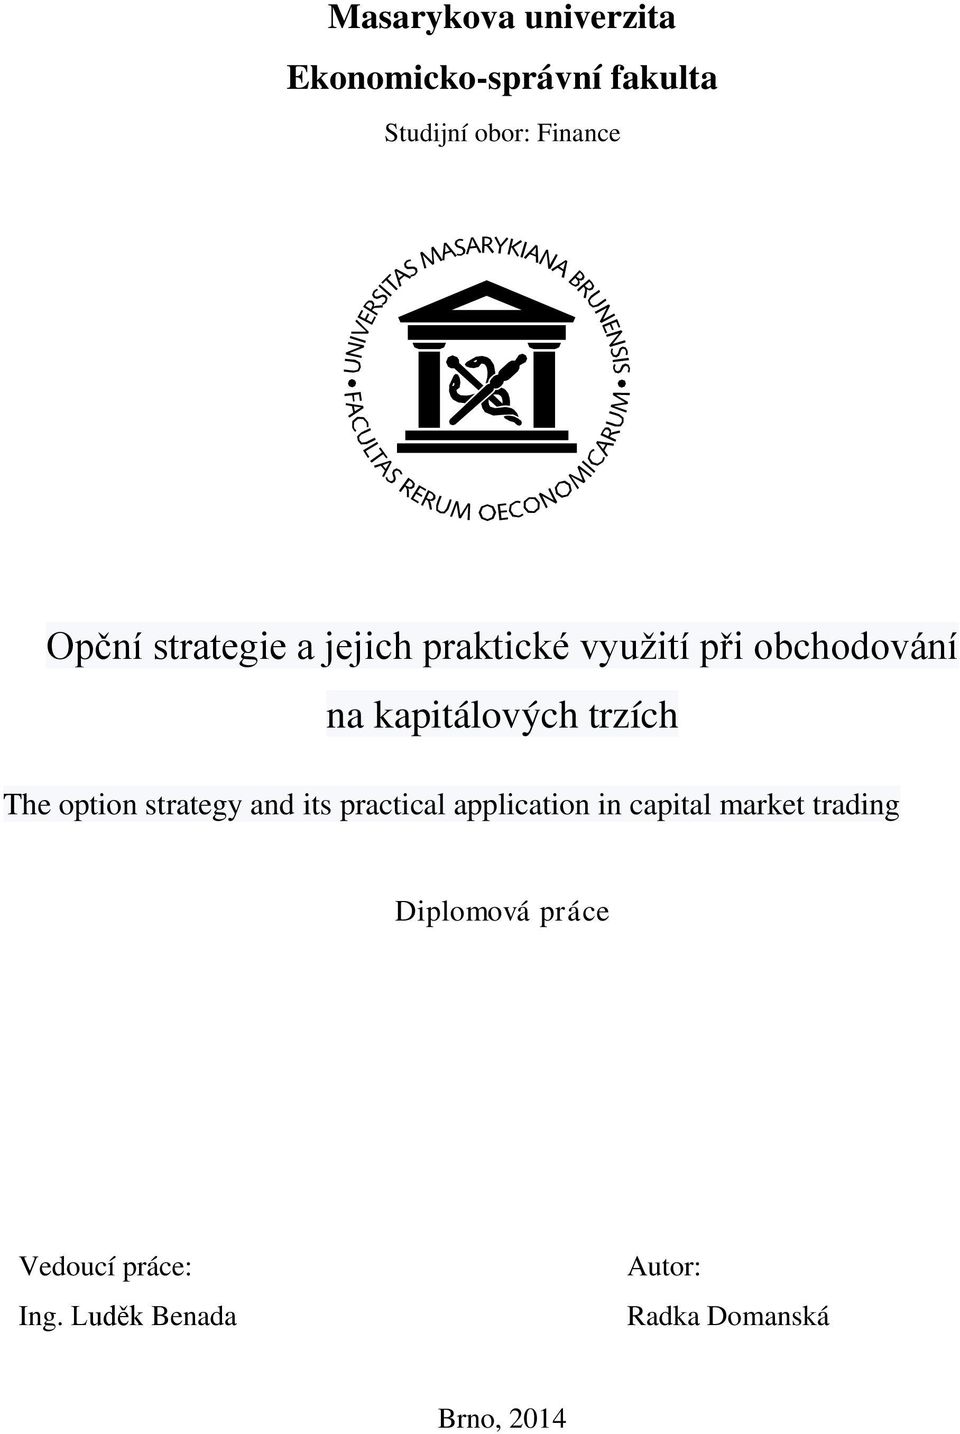 The option strategy and its practical application in capital market trading